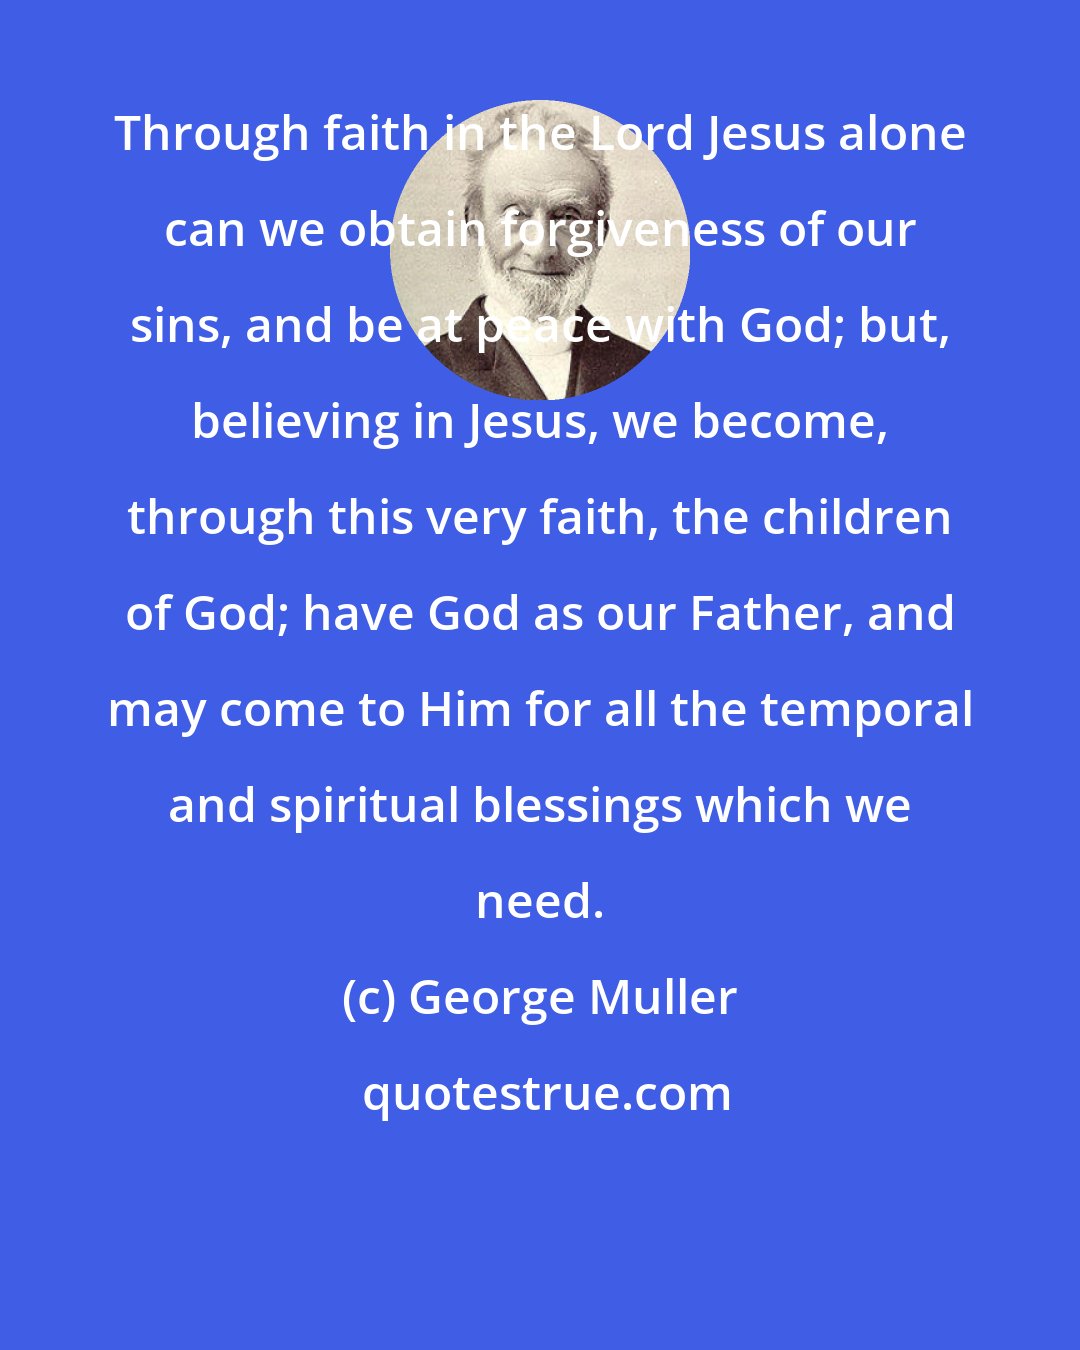 George Muller: Through faith in the Lord Jesus alone can we obtain forgiveness of our sins, and be at peace with God; but, believing in Jesus, we become, through this very faith, the children of God; have God as our Father, and may come to Him for all the temporal and spiritual blessings which we need.